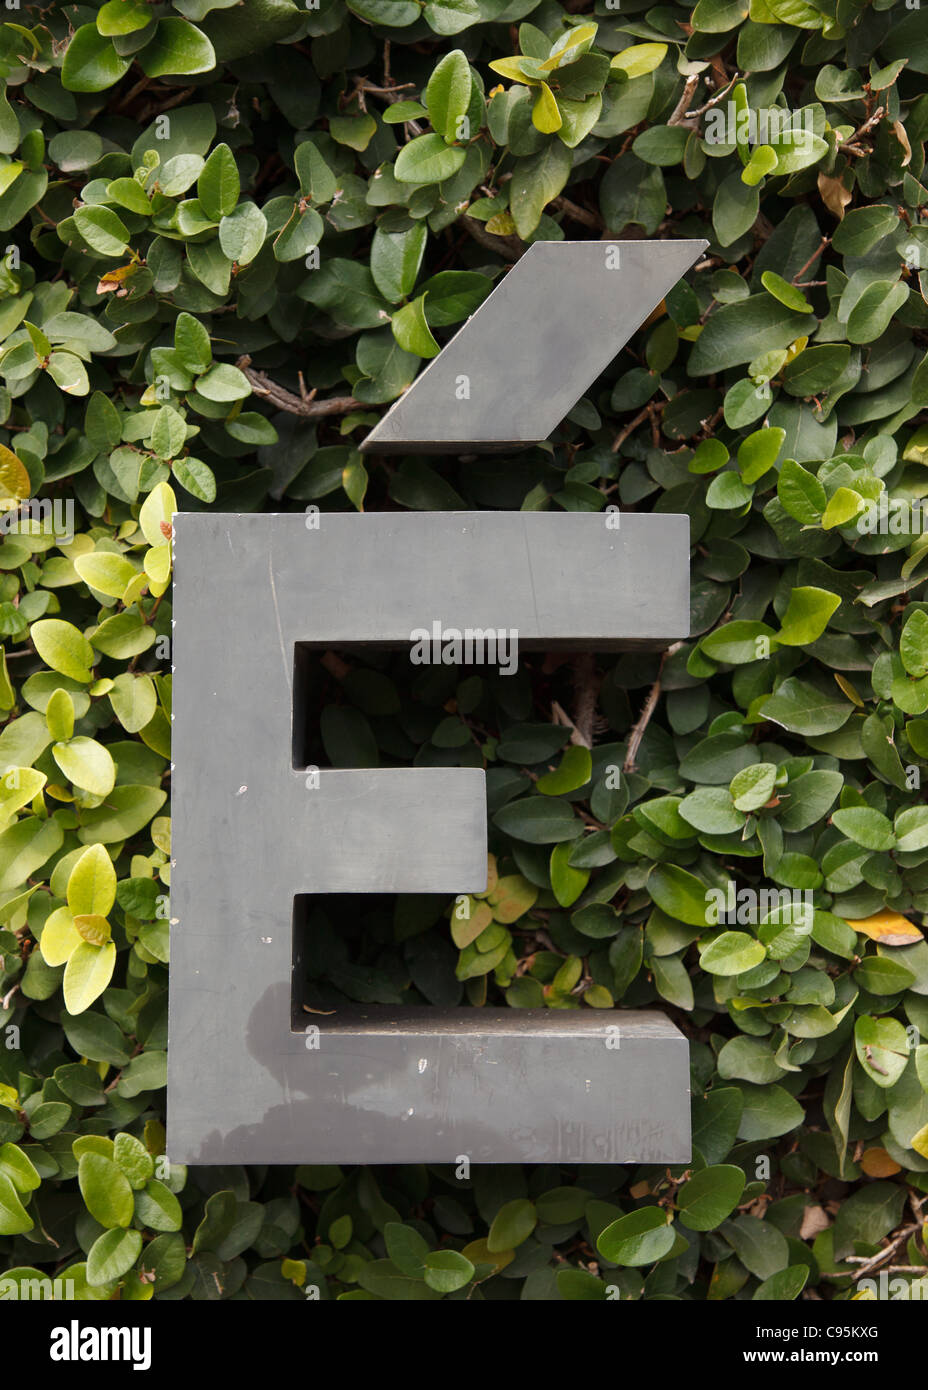 accented-spanish-letter-on-the-side-of-the-hotel-san-jose-in-austin